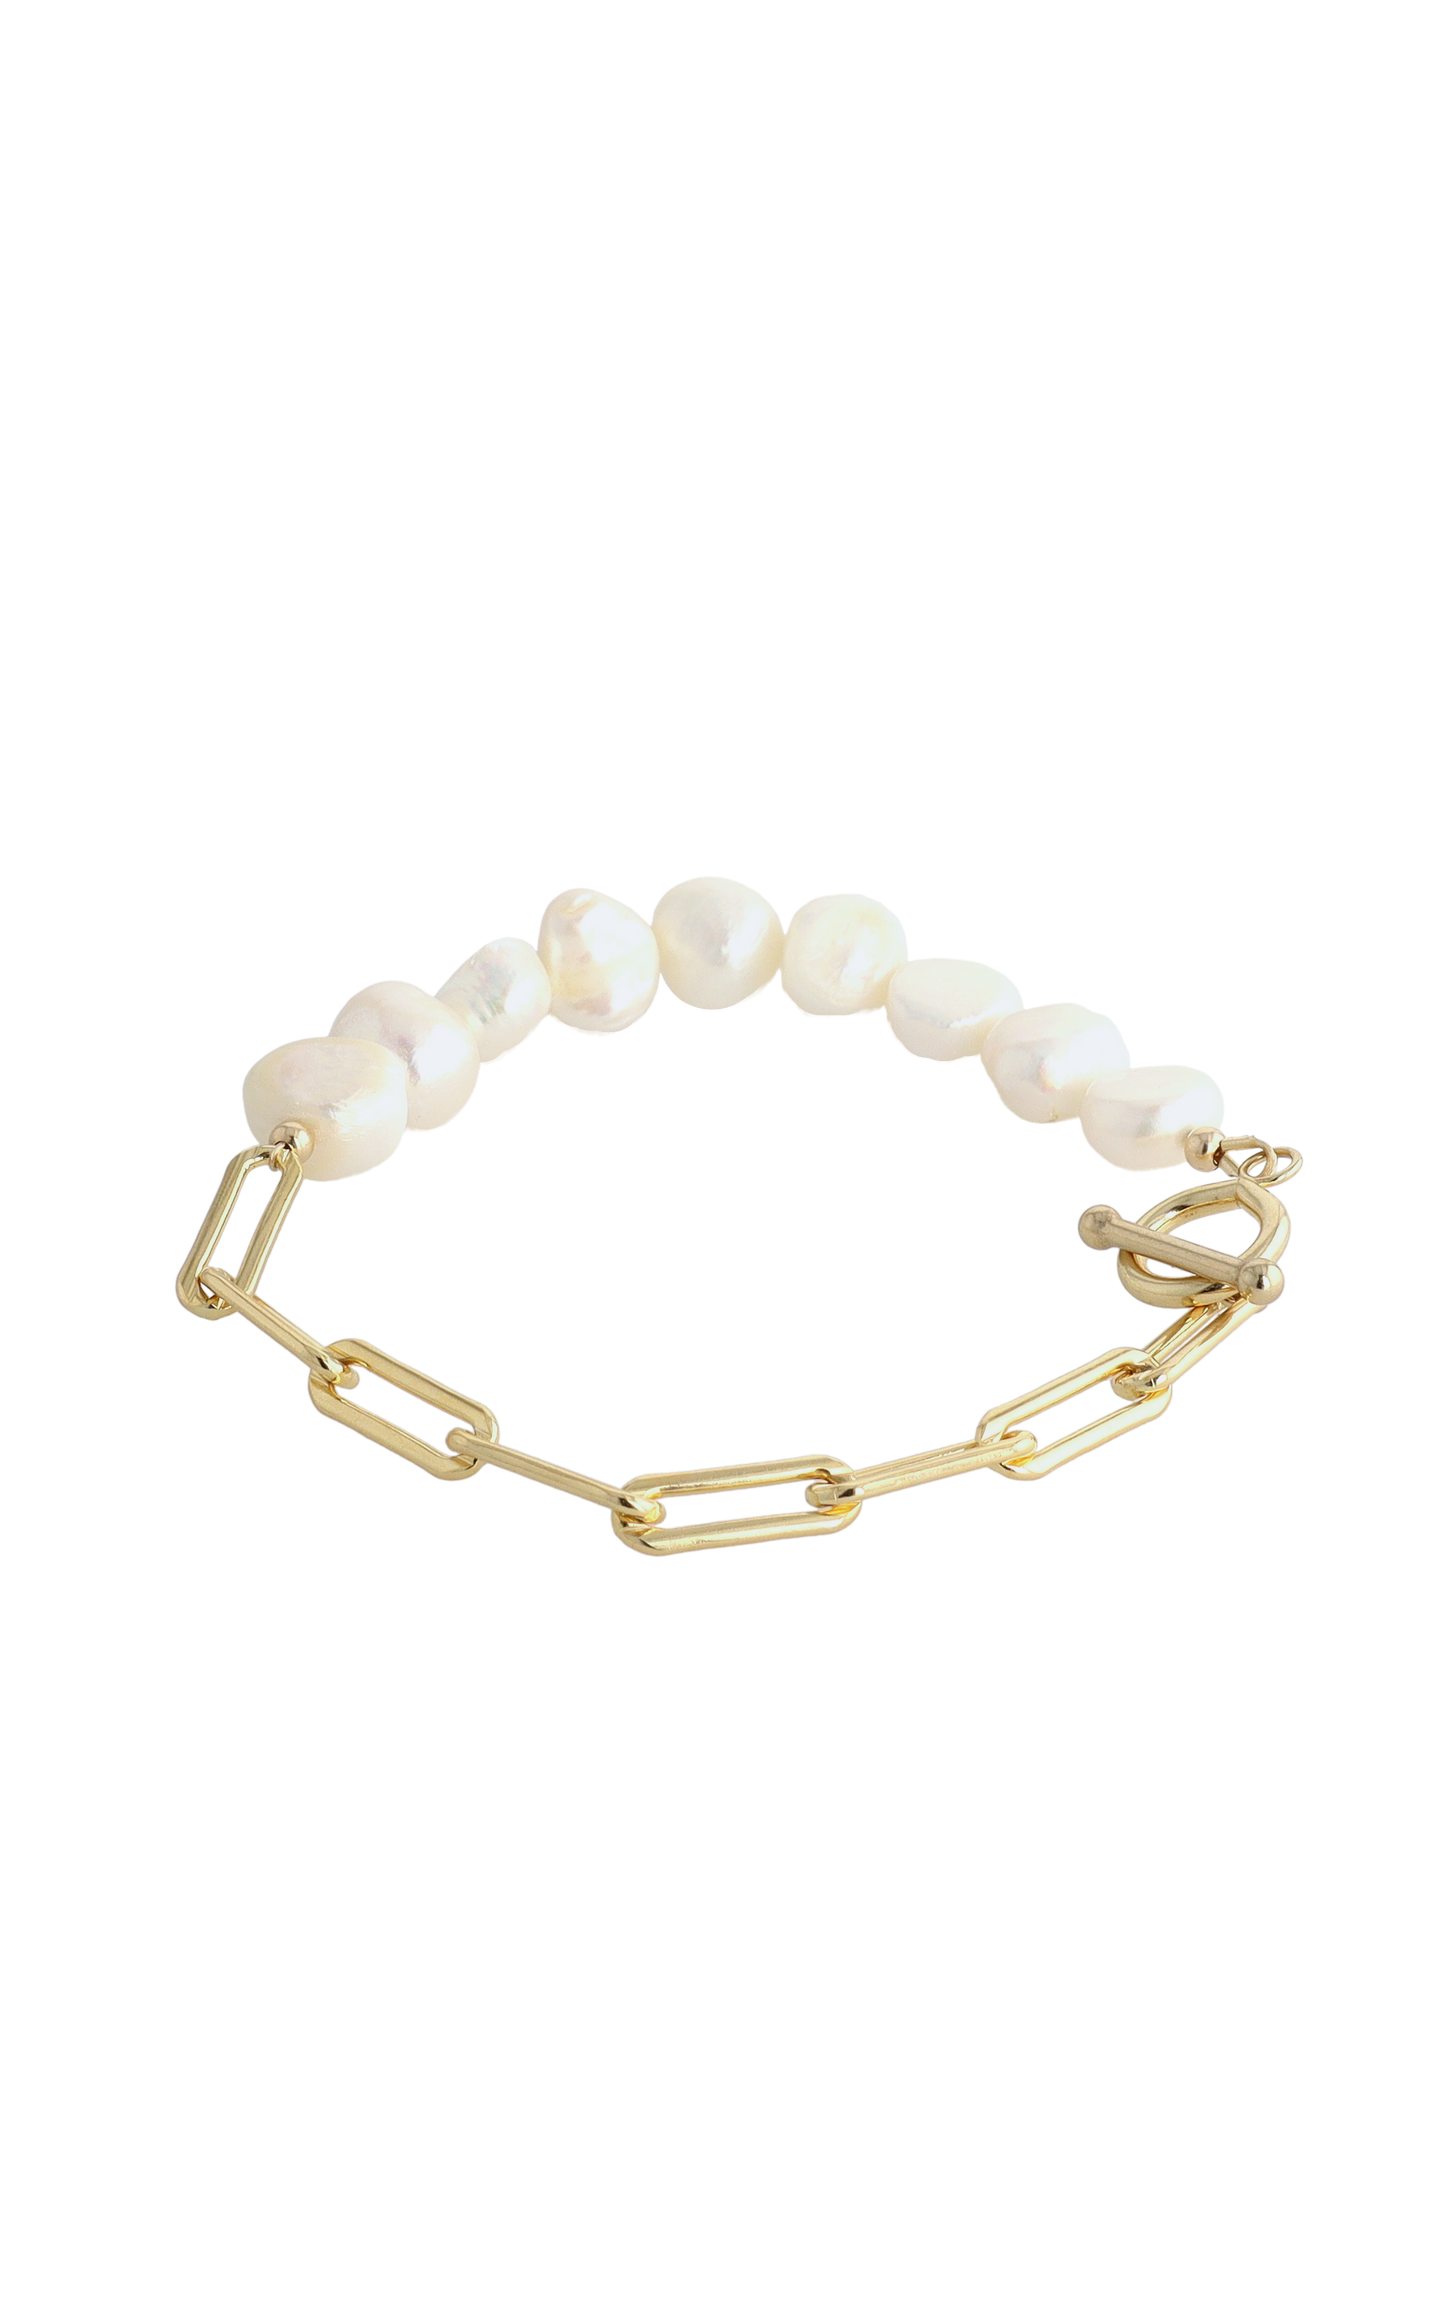 Goddess of Serenity Gold Vermeil Bracelet with Fresh Water Pearl